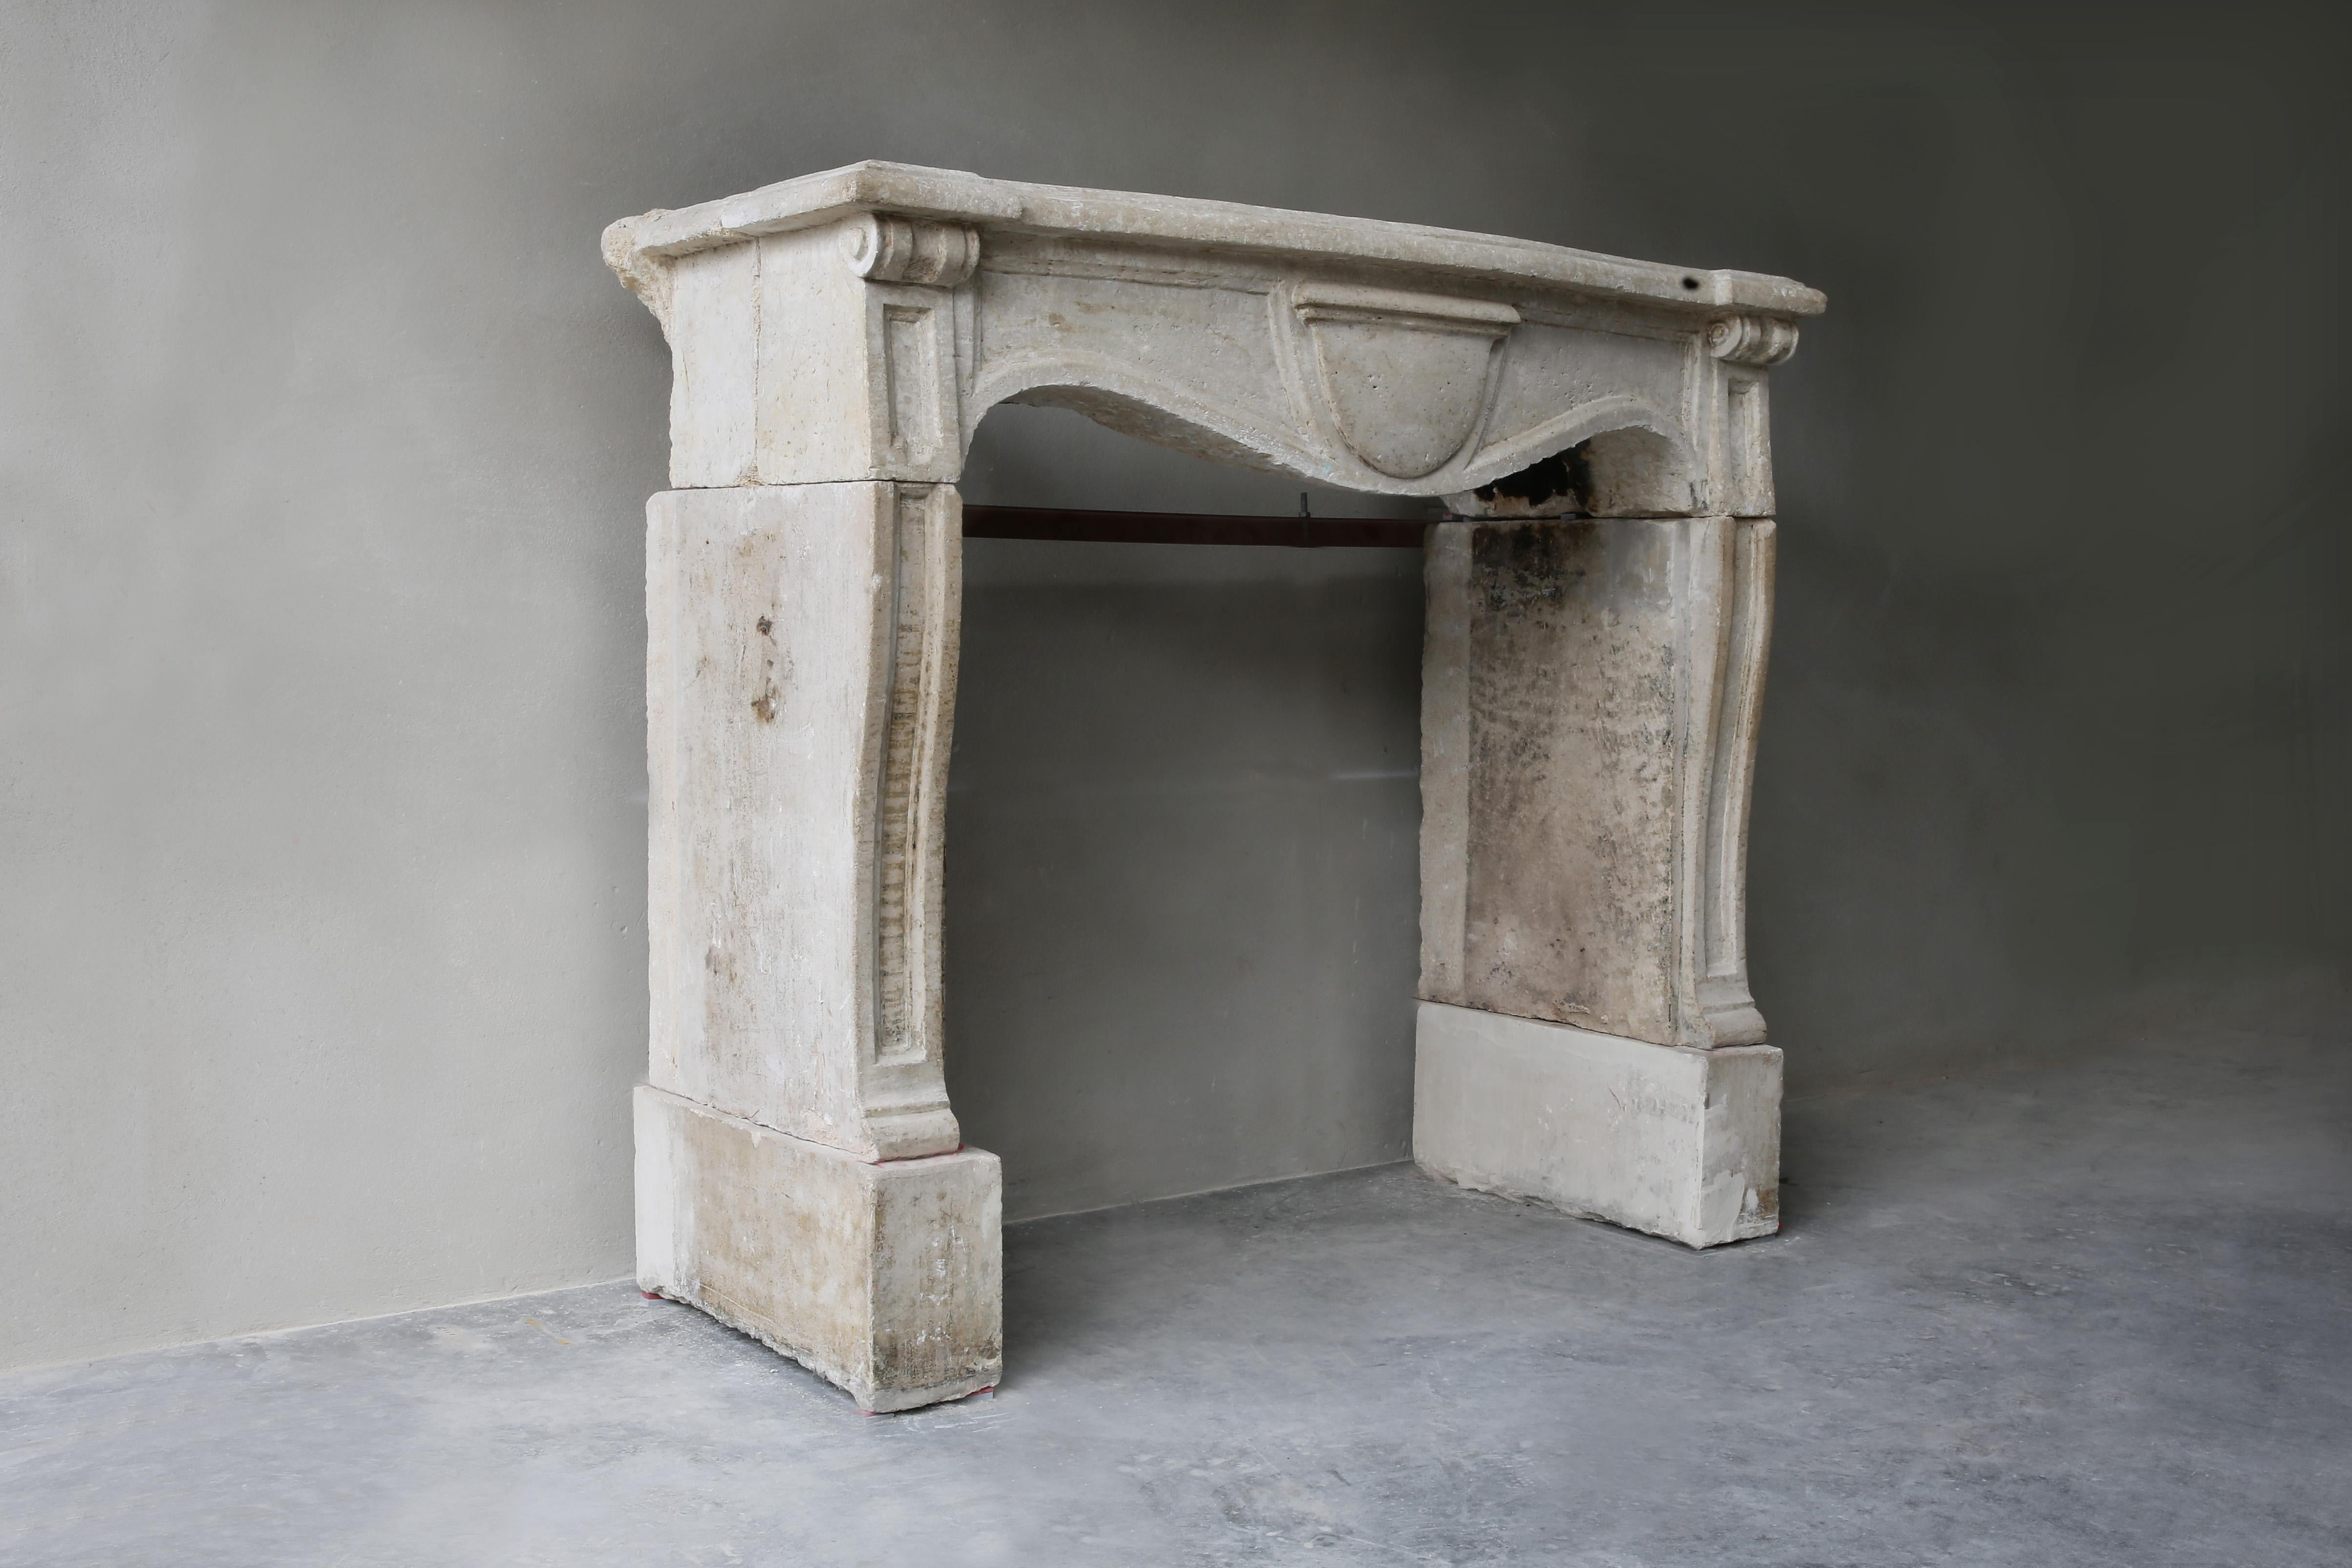 We have a very unique and old fireplace from the year 1680!! This is the oldest mantel (fireplace) we have in our collection. This fireplace comes from a Chateau in Verdun. It is an elegant, yet robust fireplace due to the wide front part. The